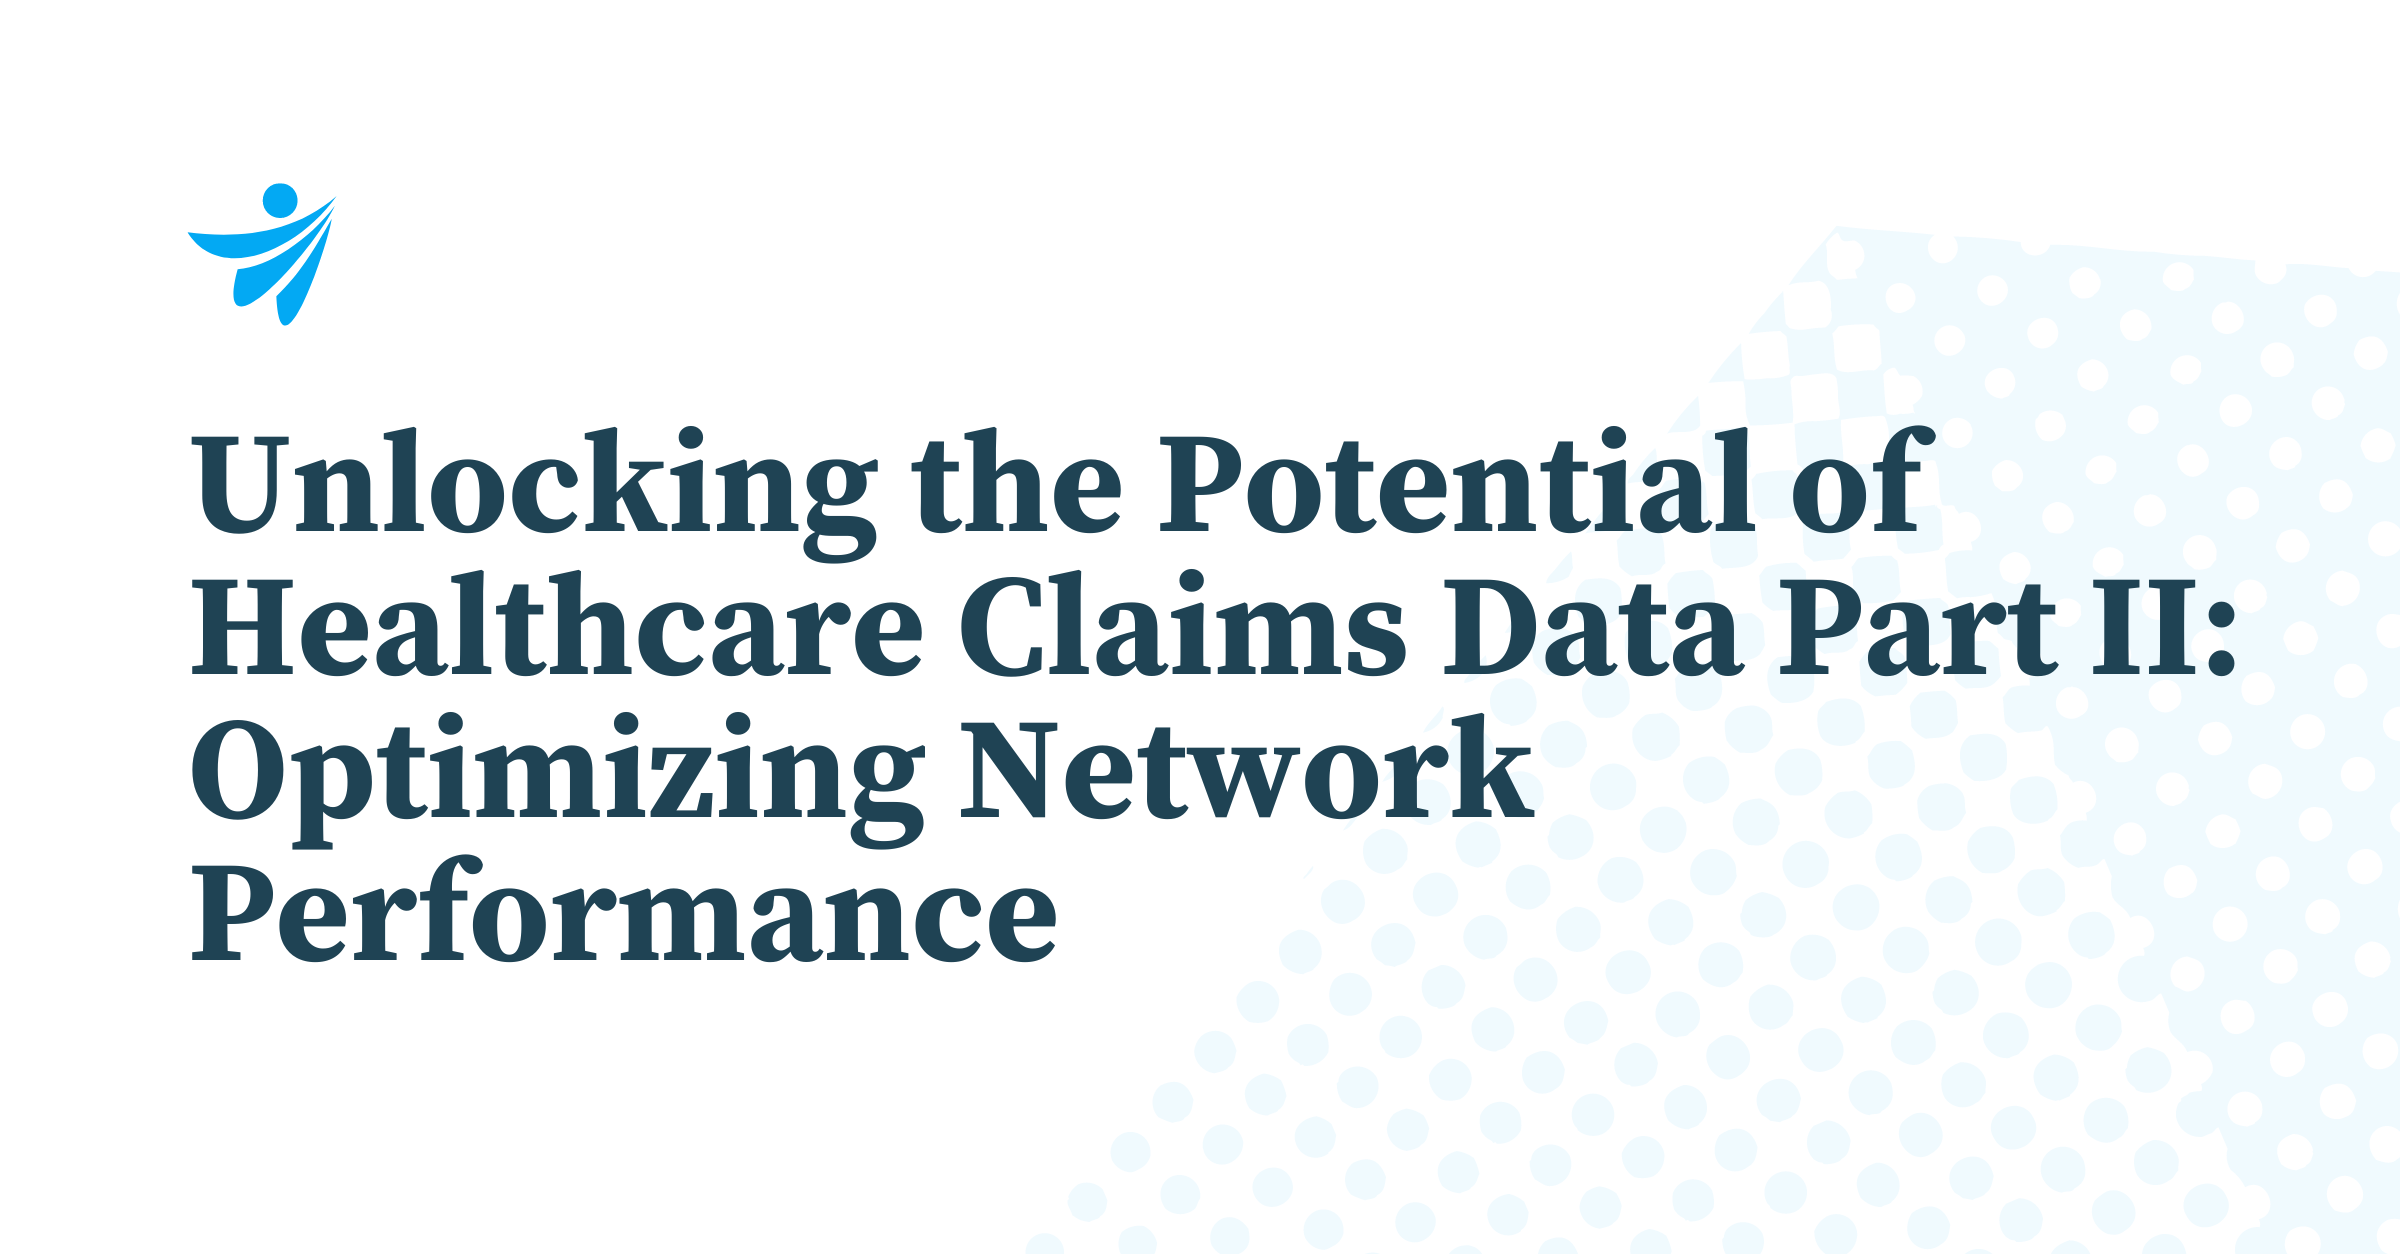 Thumbnail for Unlocking the Potential of Healthcare Claims Data Part II: Optimizing Network Performance